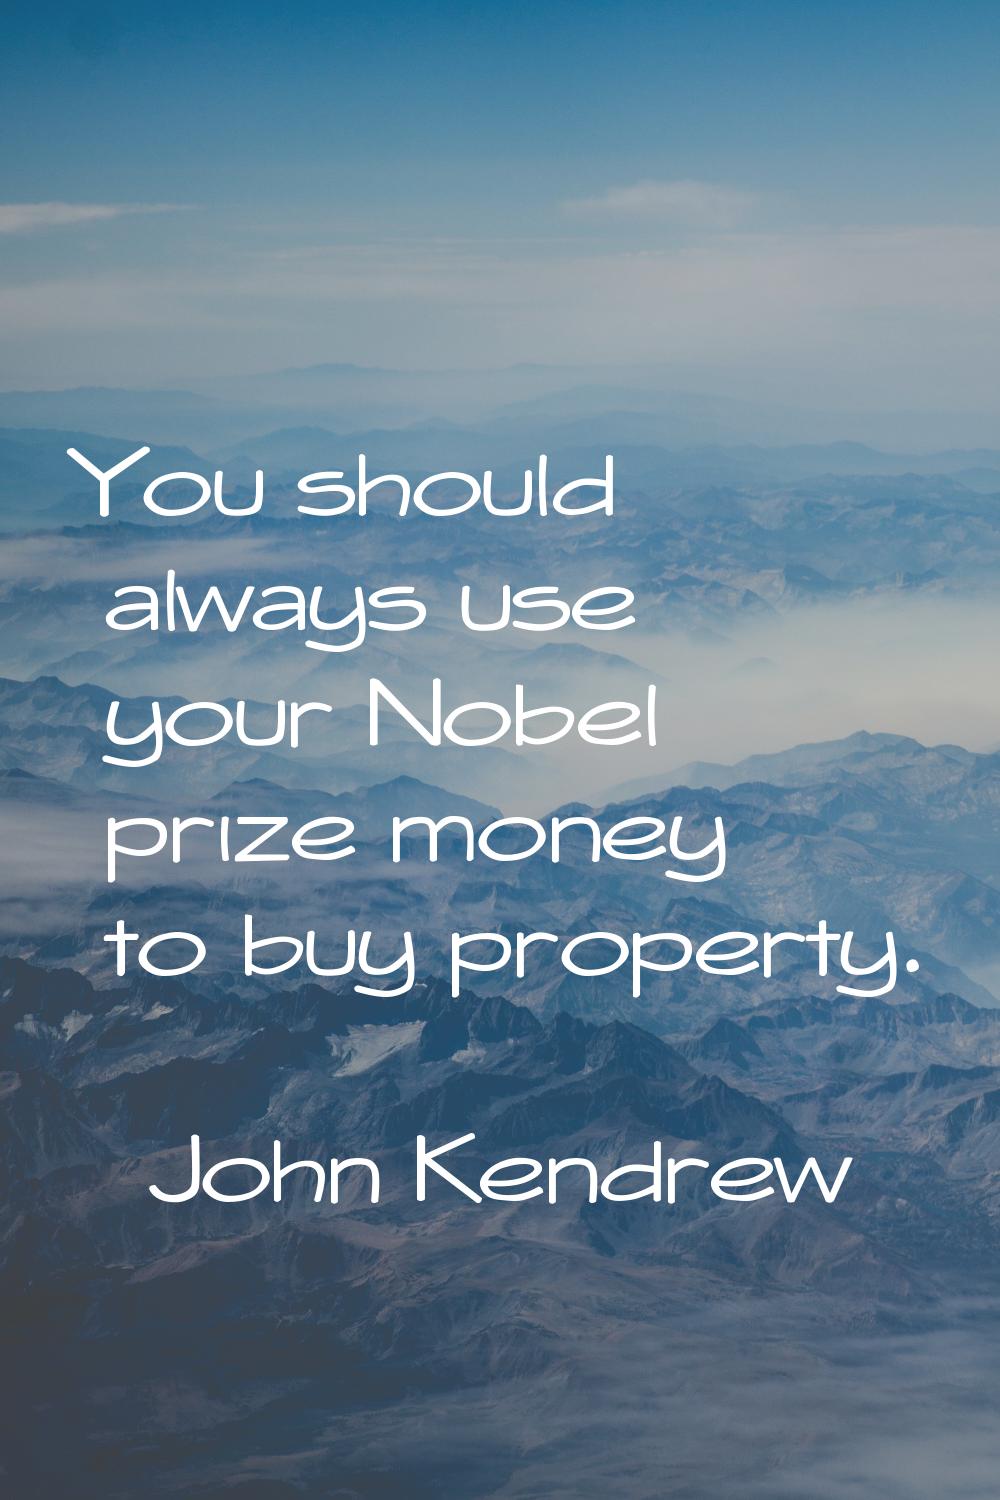 You should always use your Nobel prize money to buy property.